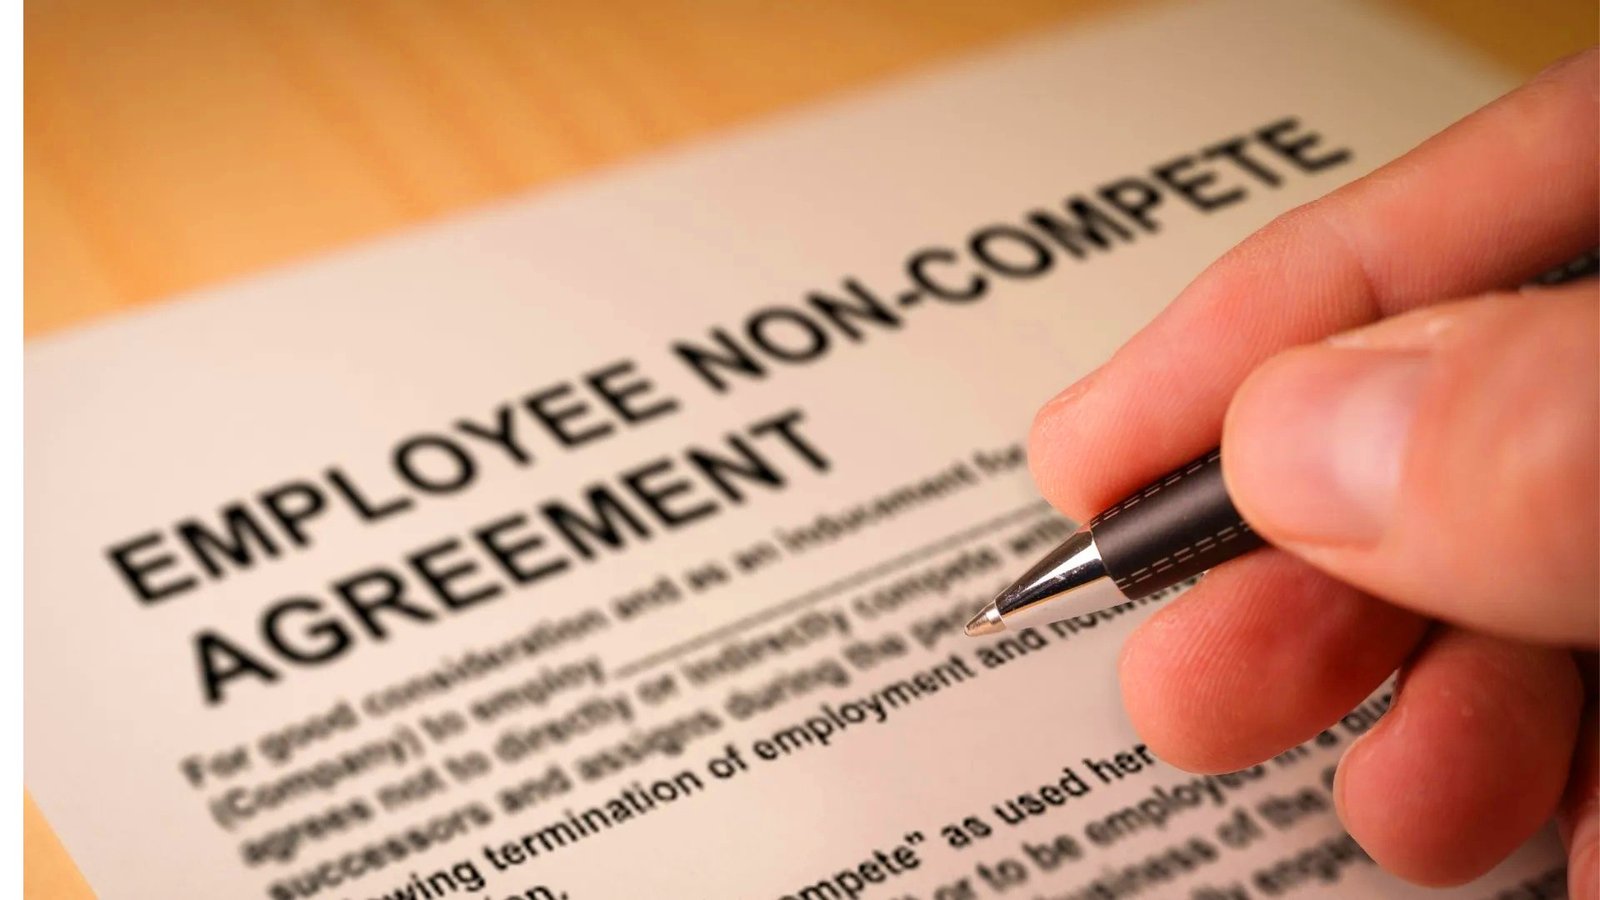 Employee Non-Compete Agreements and Restrictions